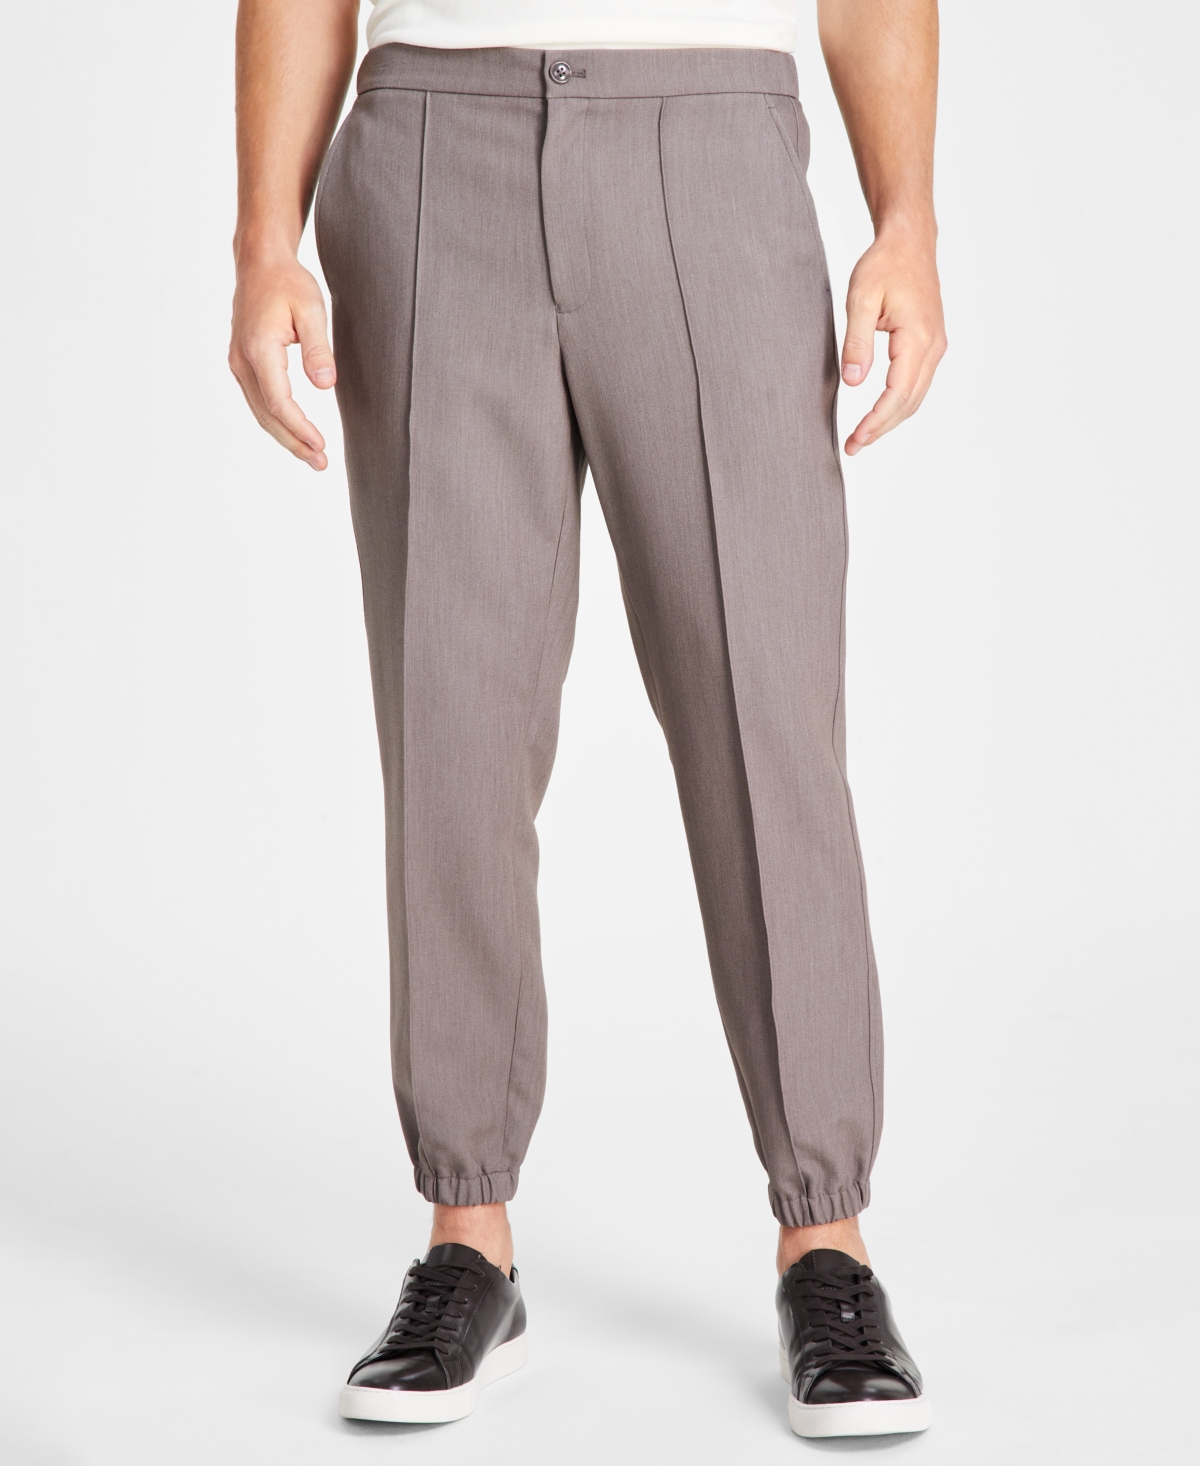 Relaxed Fit Sweatpants - Taupe - Men